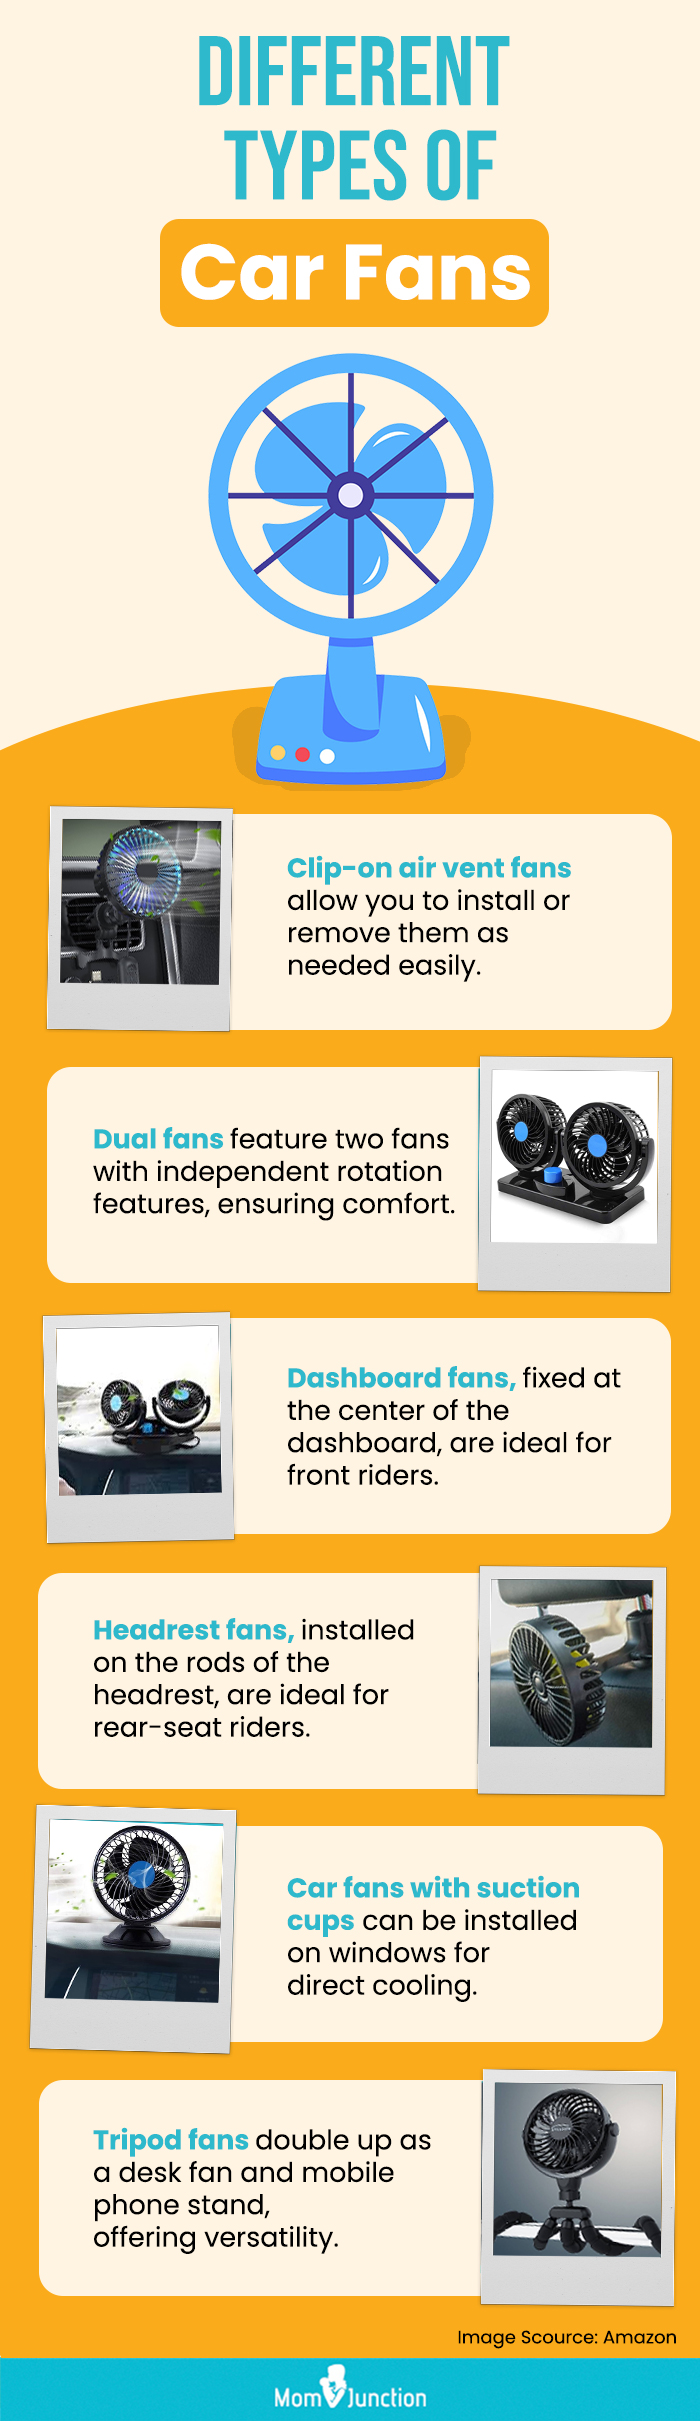 Different Types Of Car Fans(infographic)